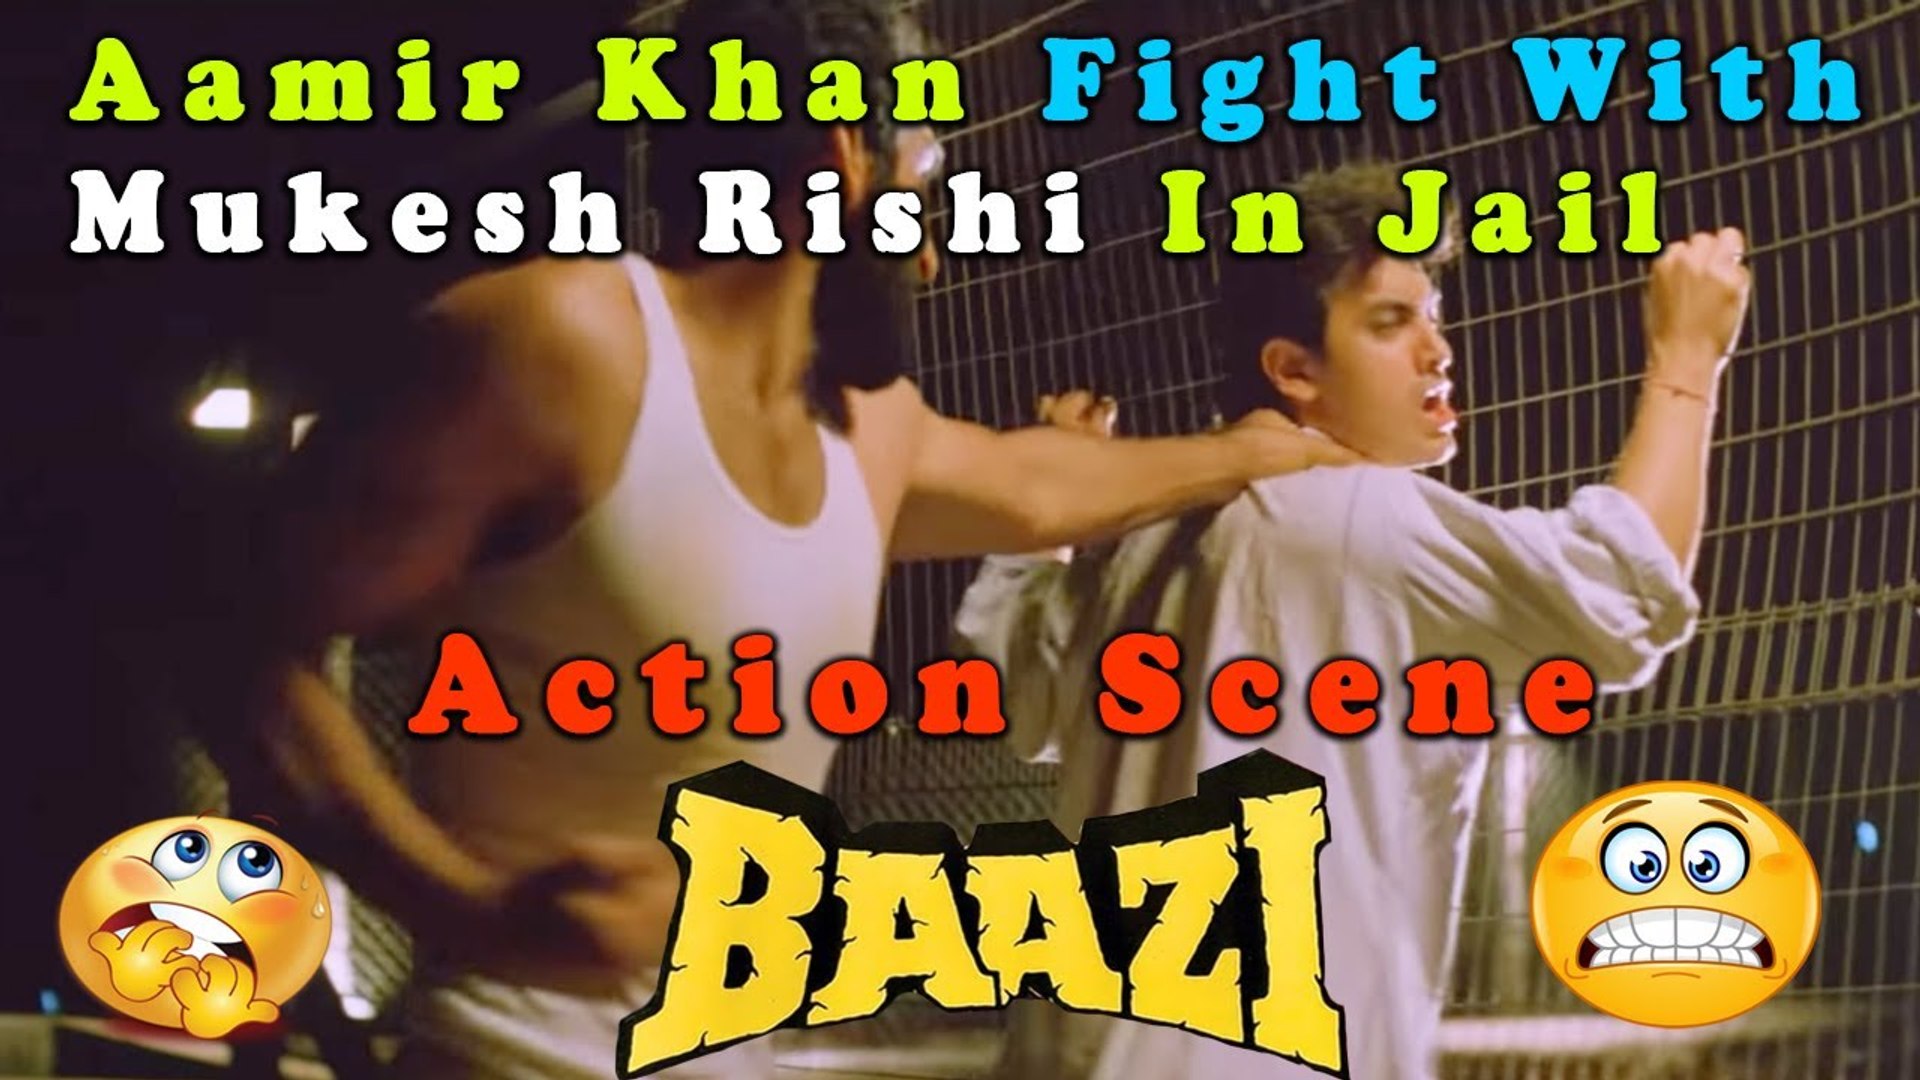 Aamir Khan Fight With Mukesh Rishi In Jail Baazi (1995) Aamir Khan Paresh Rawal Mukesh Rishi Bollywood Movie Action Scene Part 20